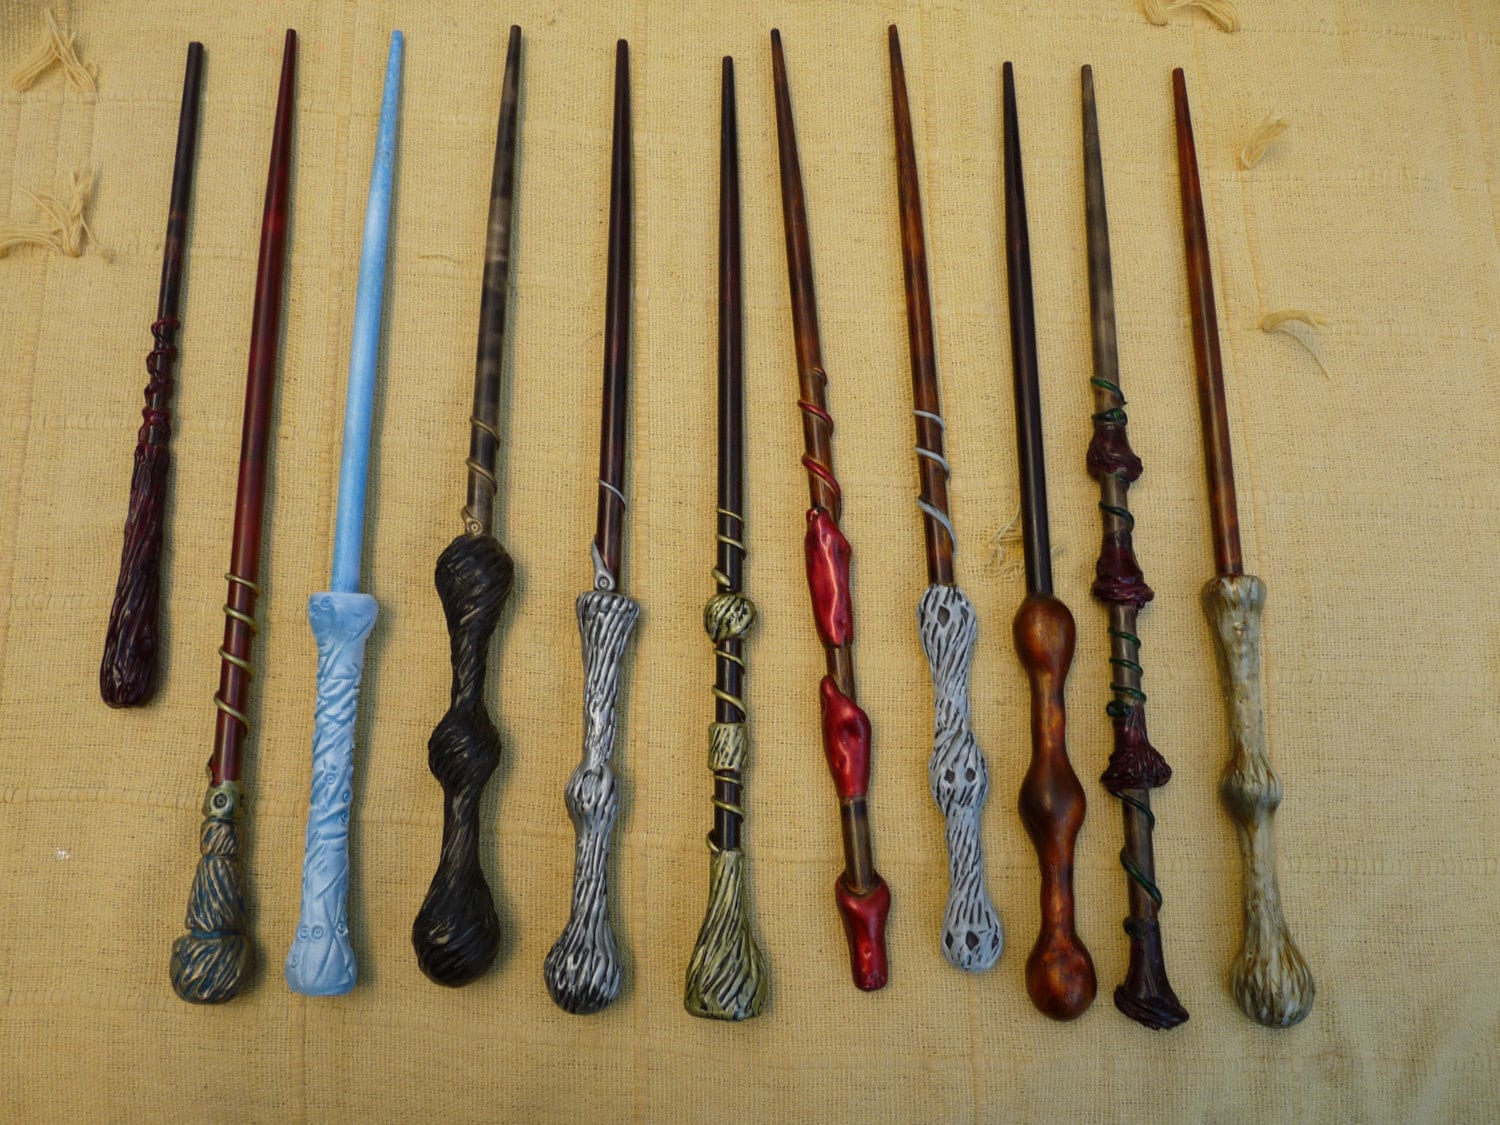 Magic Wand Handcraft Wiccan Witch Fairy Wand Unique 10 pieces